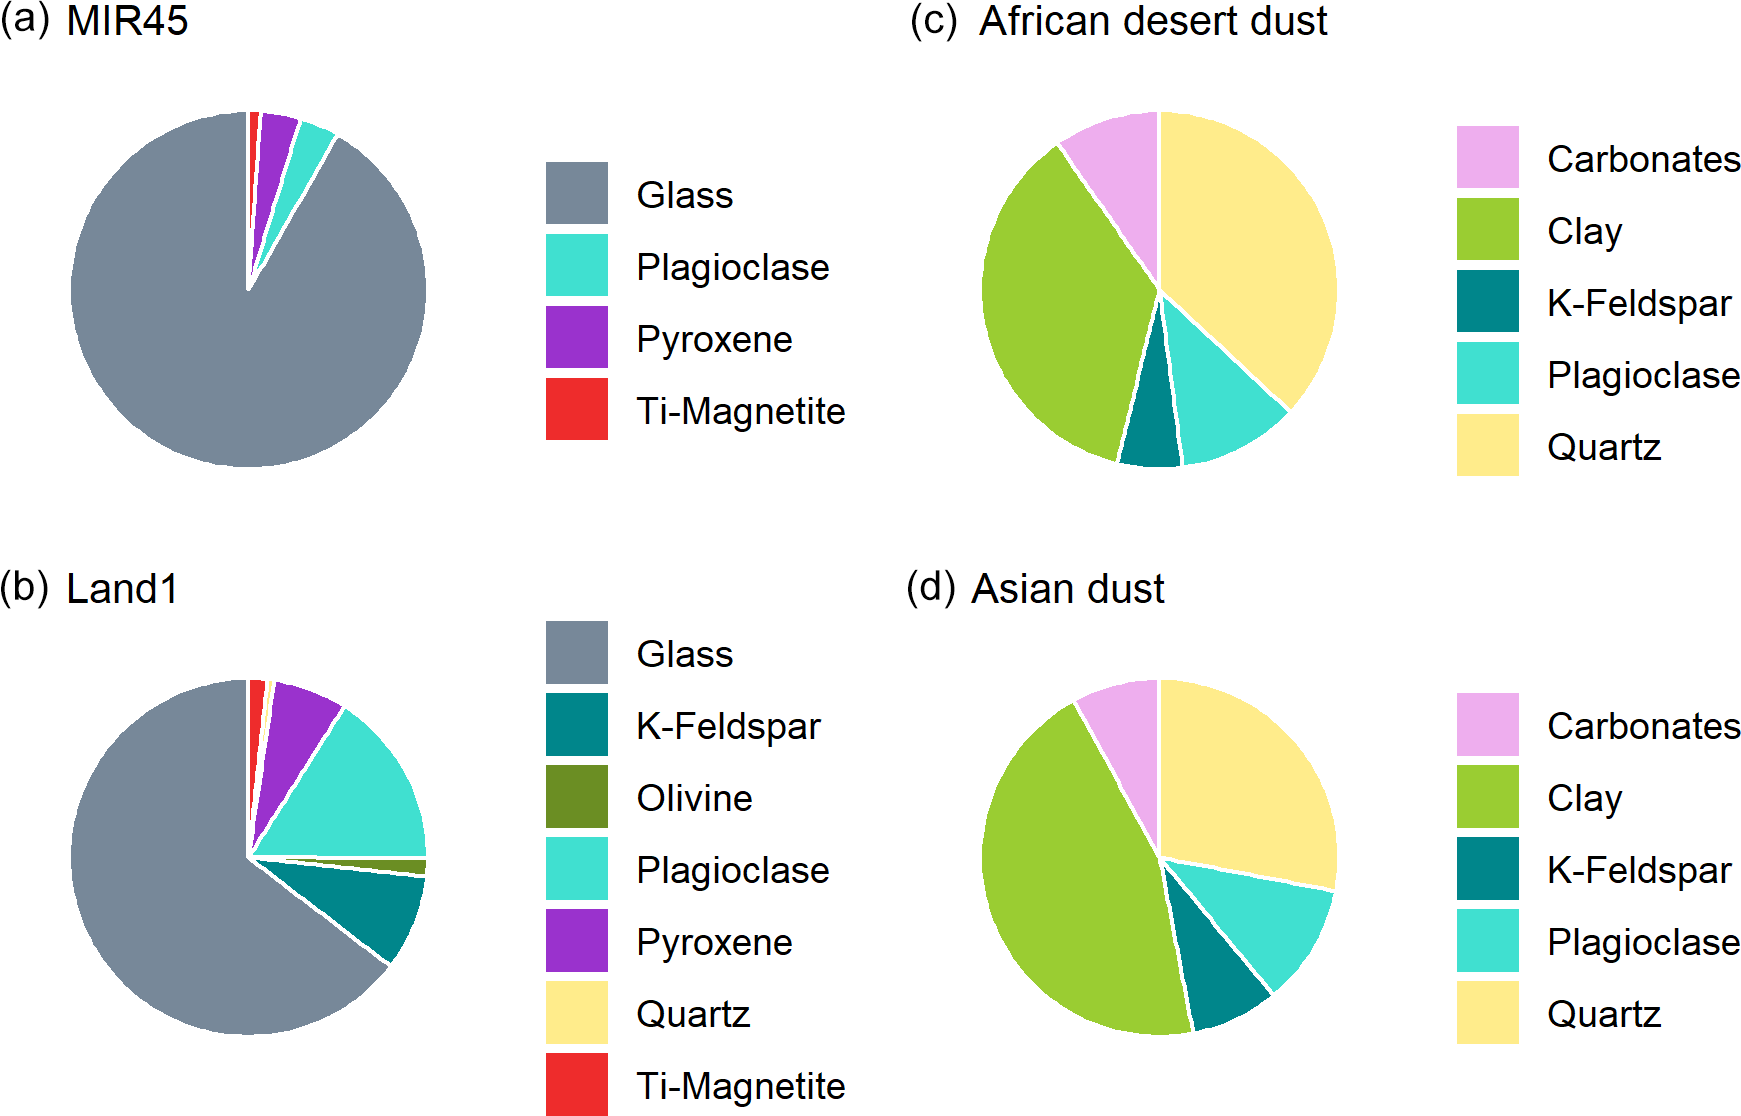 Acp Distinct Chemical And Mineralogical Composition Of Icelandic Dust Compared To Northern African And Asian Dust